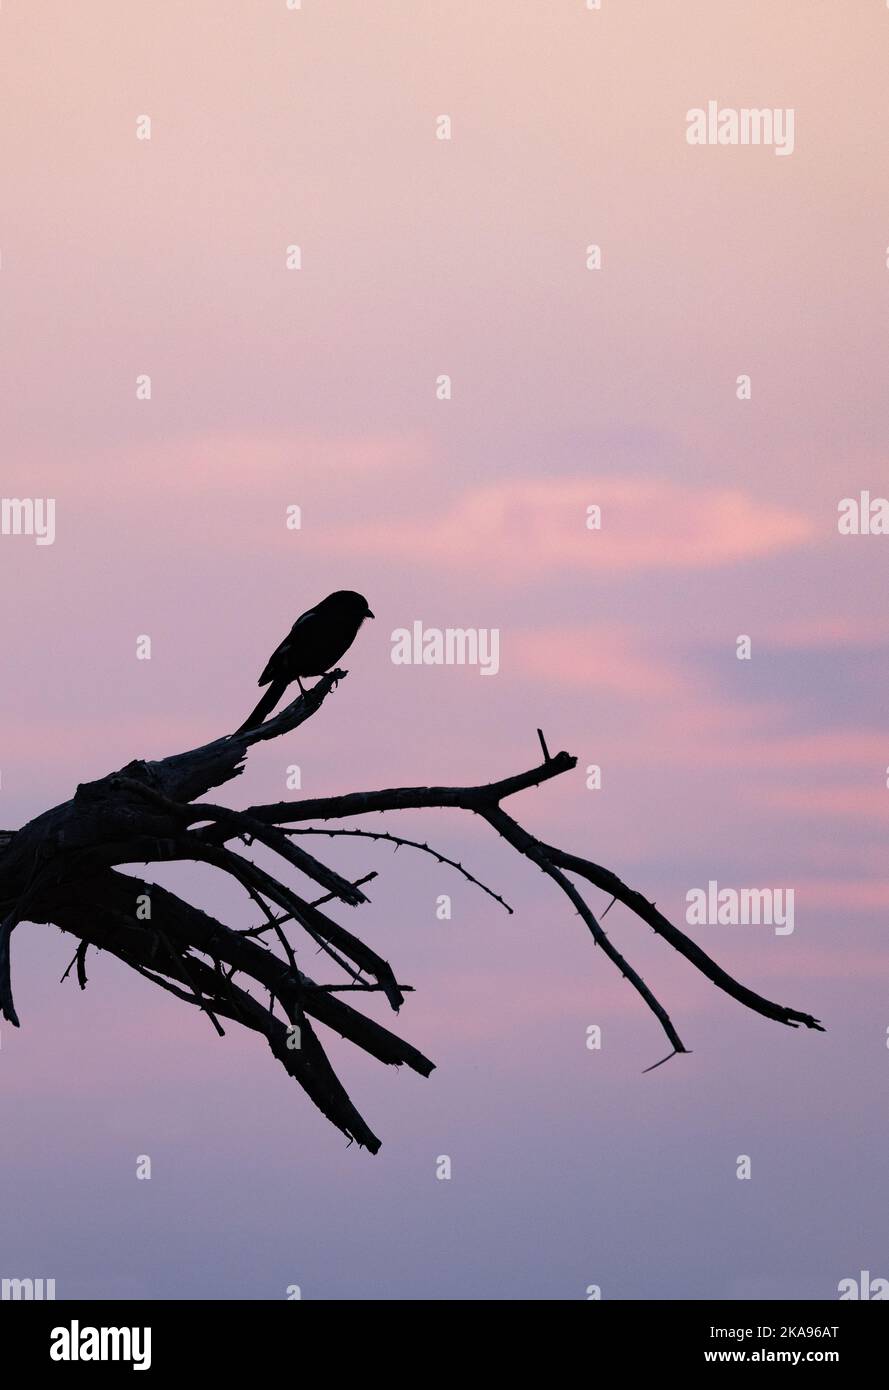 Sunset - evening red sky at dusk with bird and tree in silhouette, Botswana Africa. Concept peace and tranquility Stock Photo